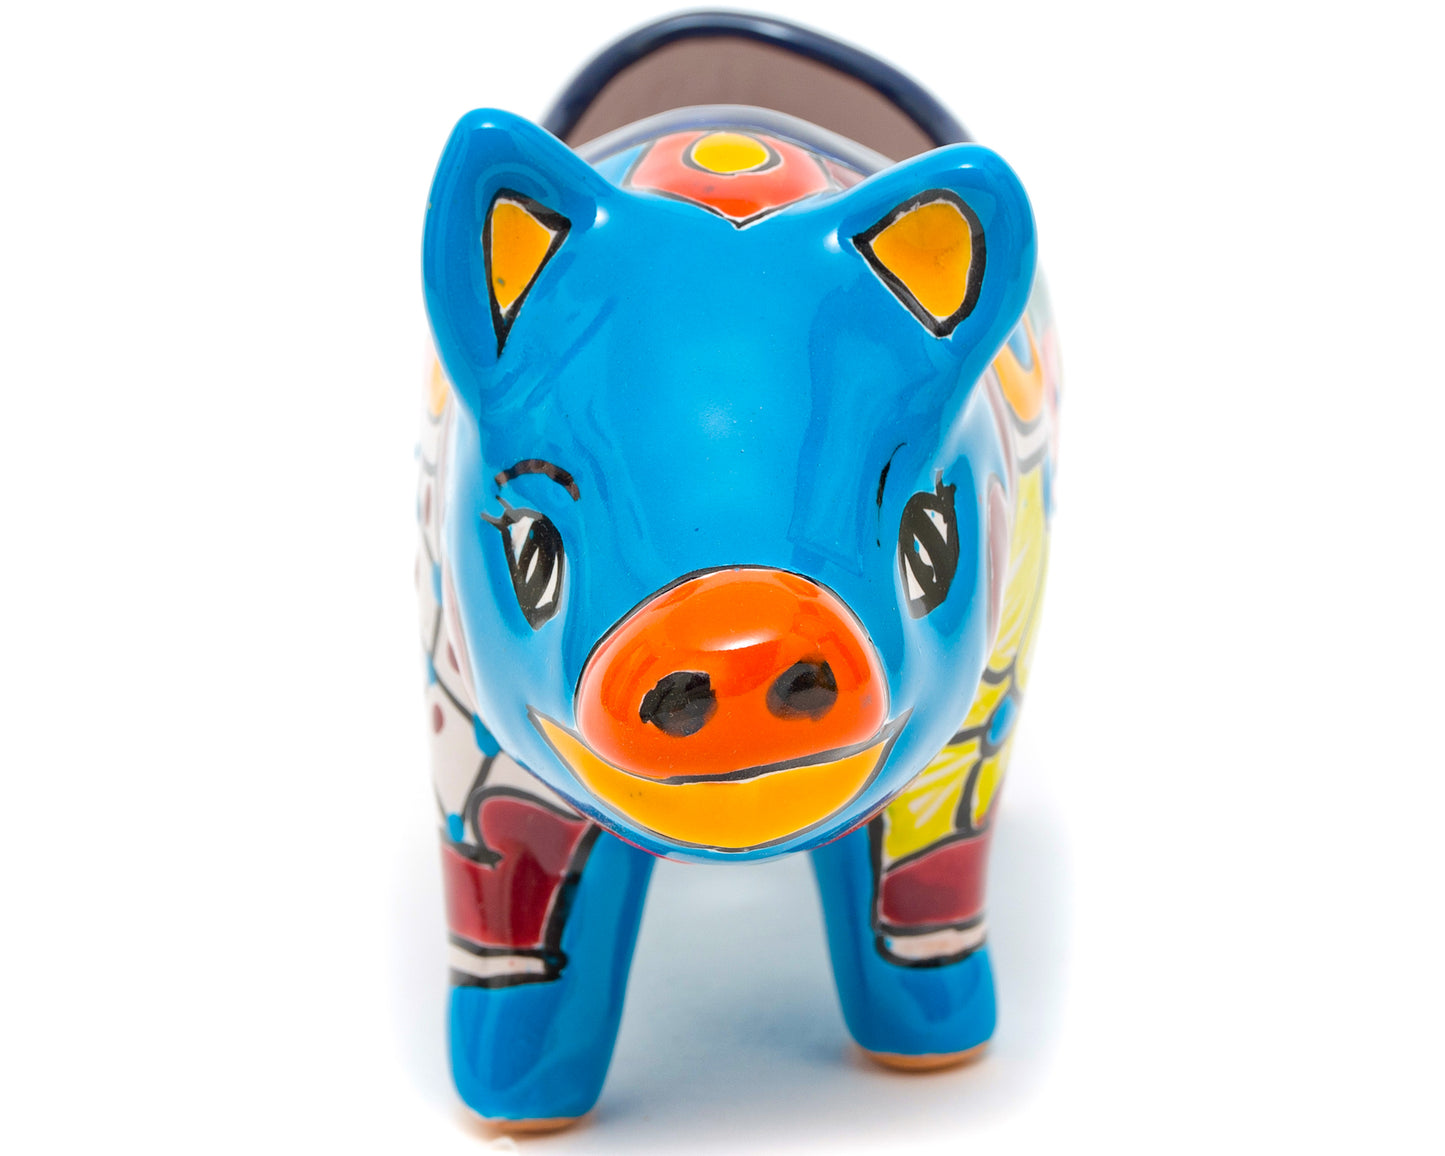 Piglet Pig Planter Small - Turquoise